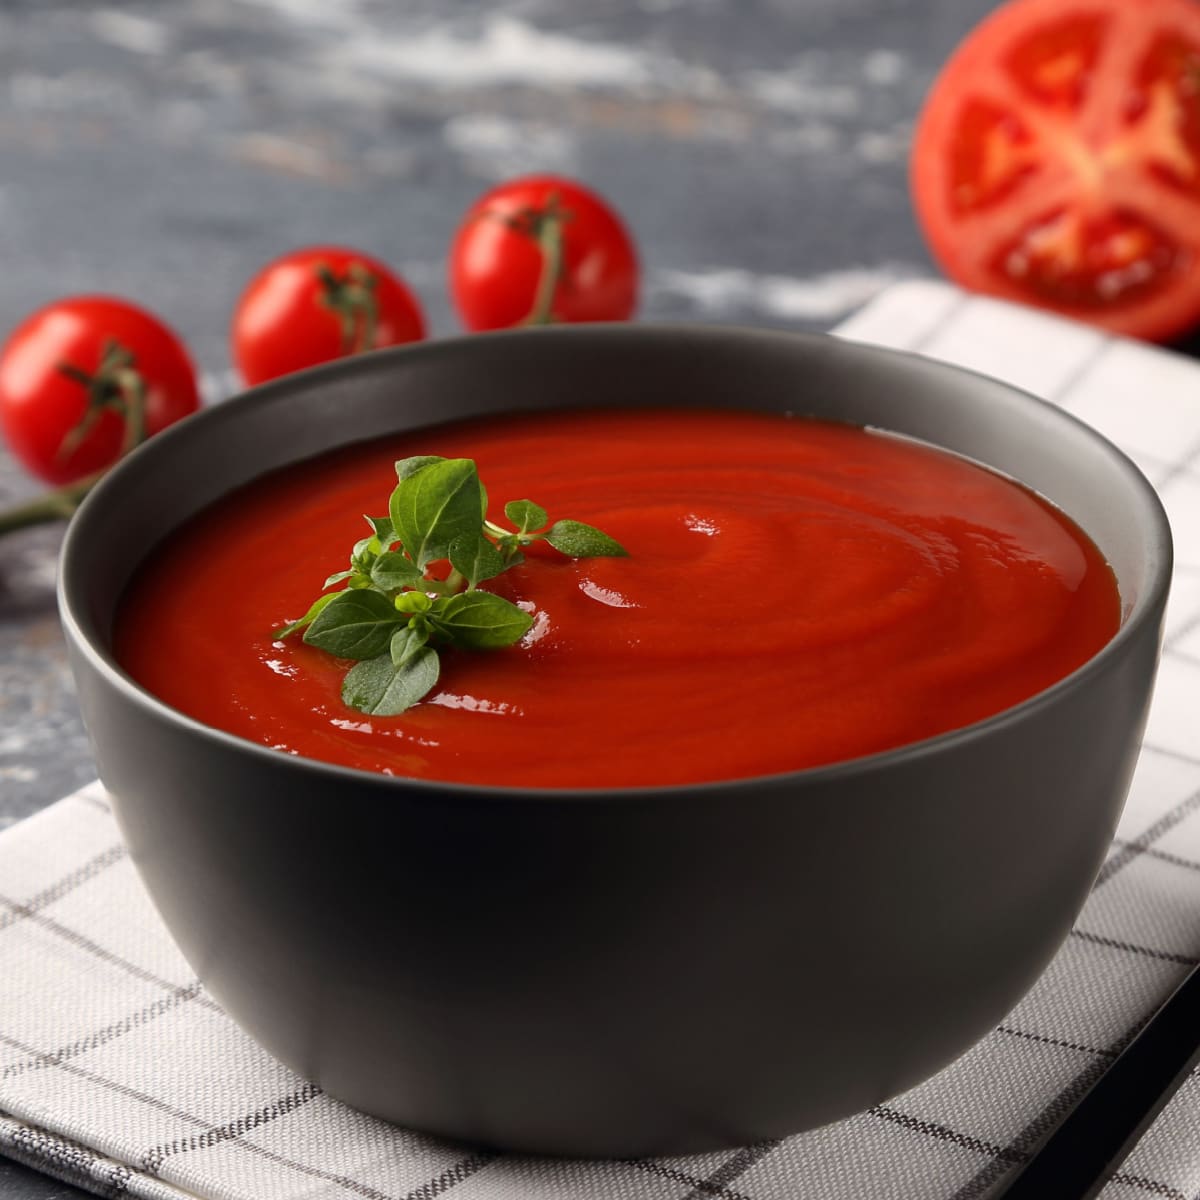 A Bowl of Tomato Soup and Fresh Tomatoes on a Wooden Table